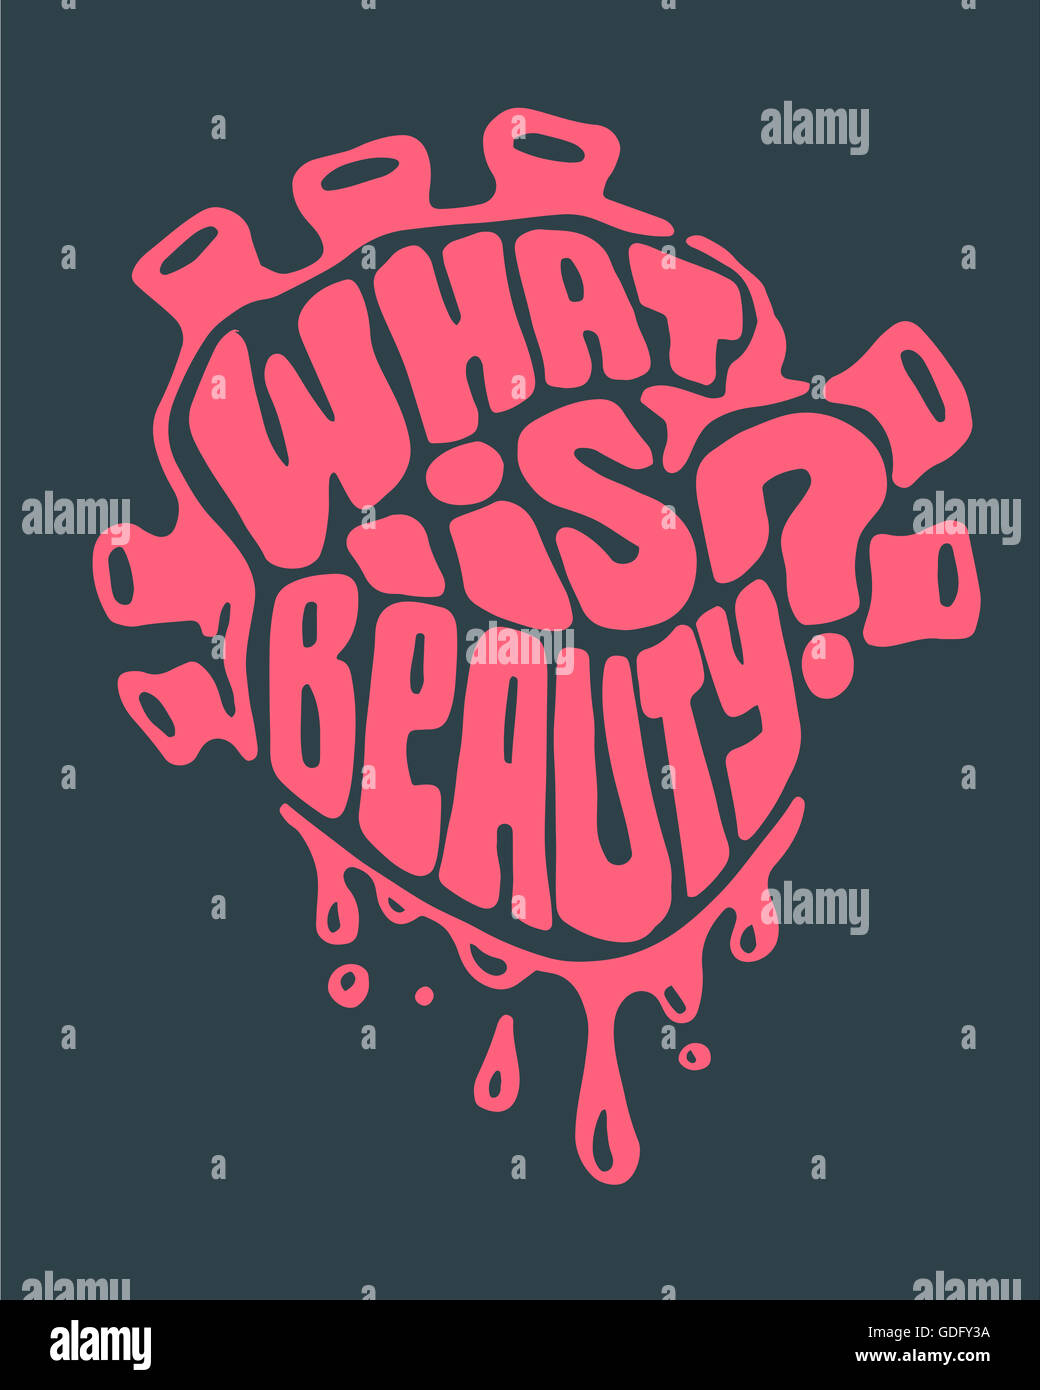 Hand drawn vector illustration or drawing of a human heart with the phrase: What is beauty? Stock Photo